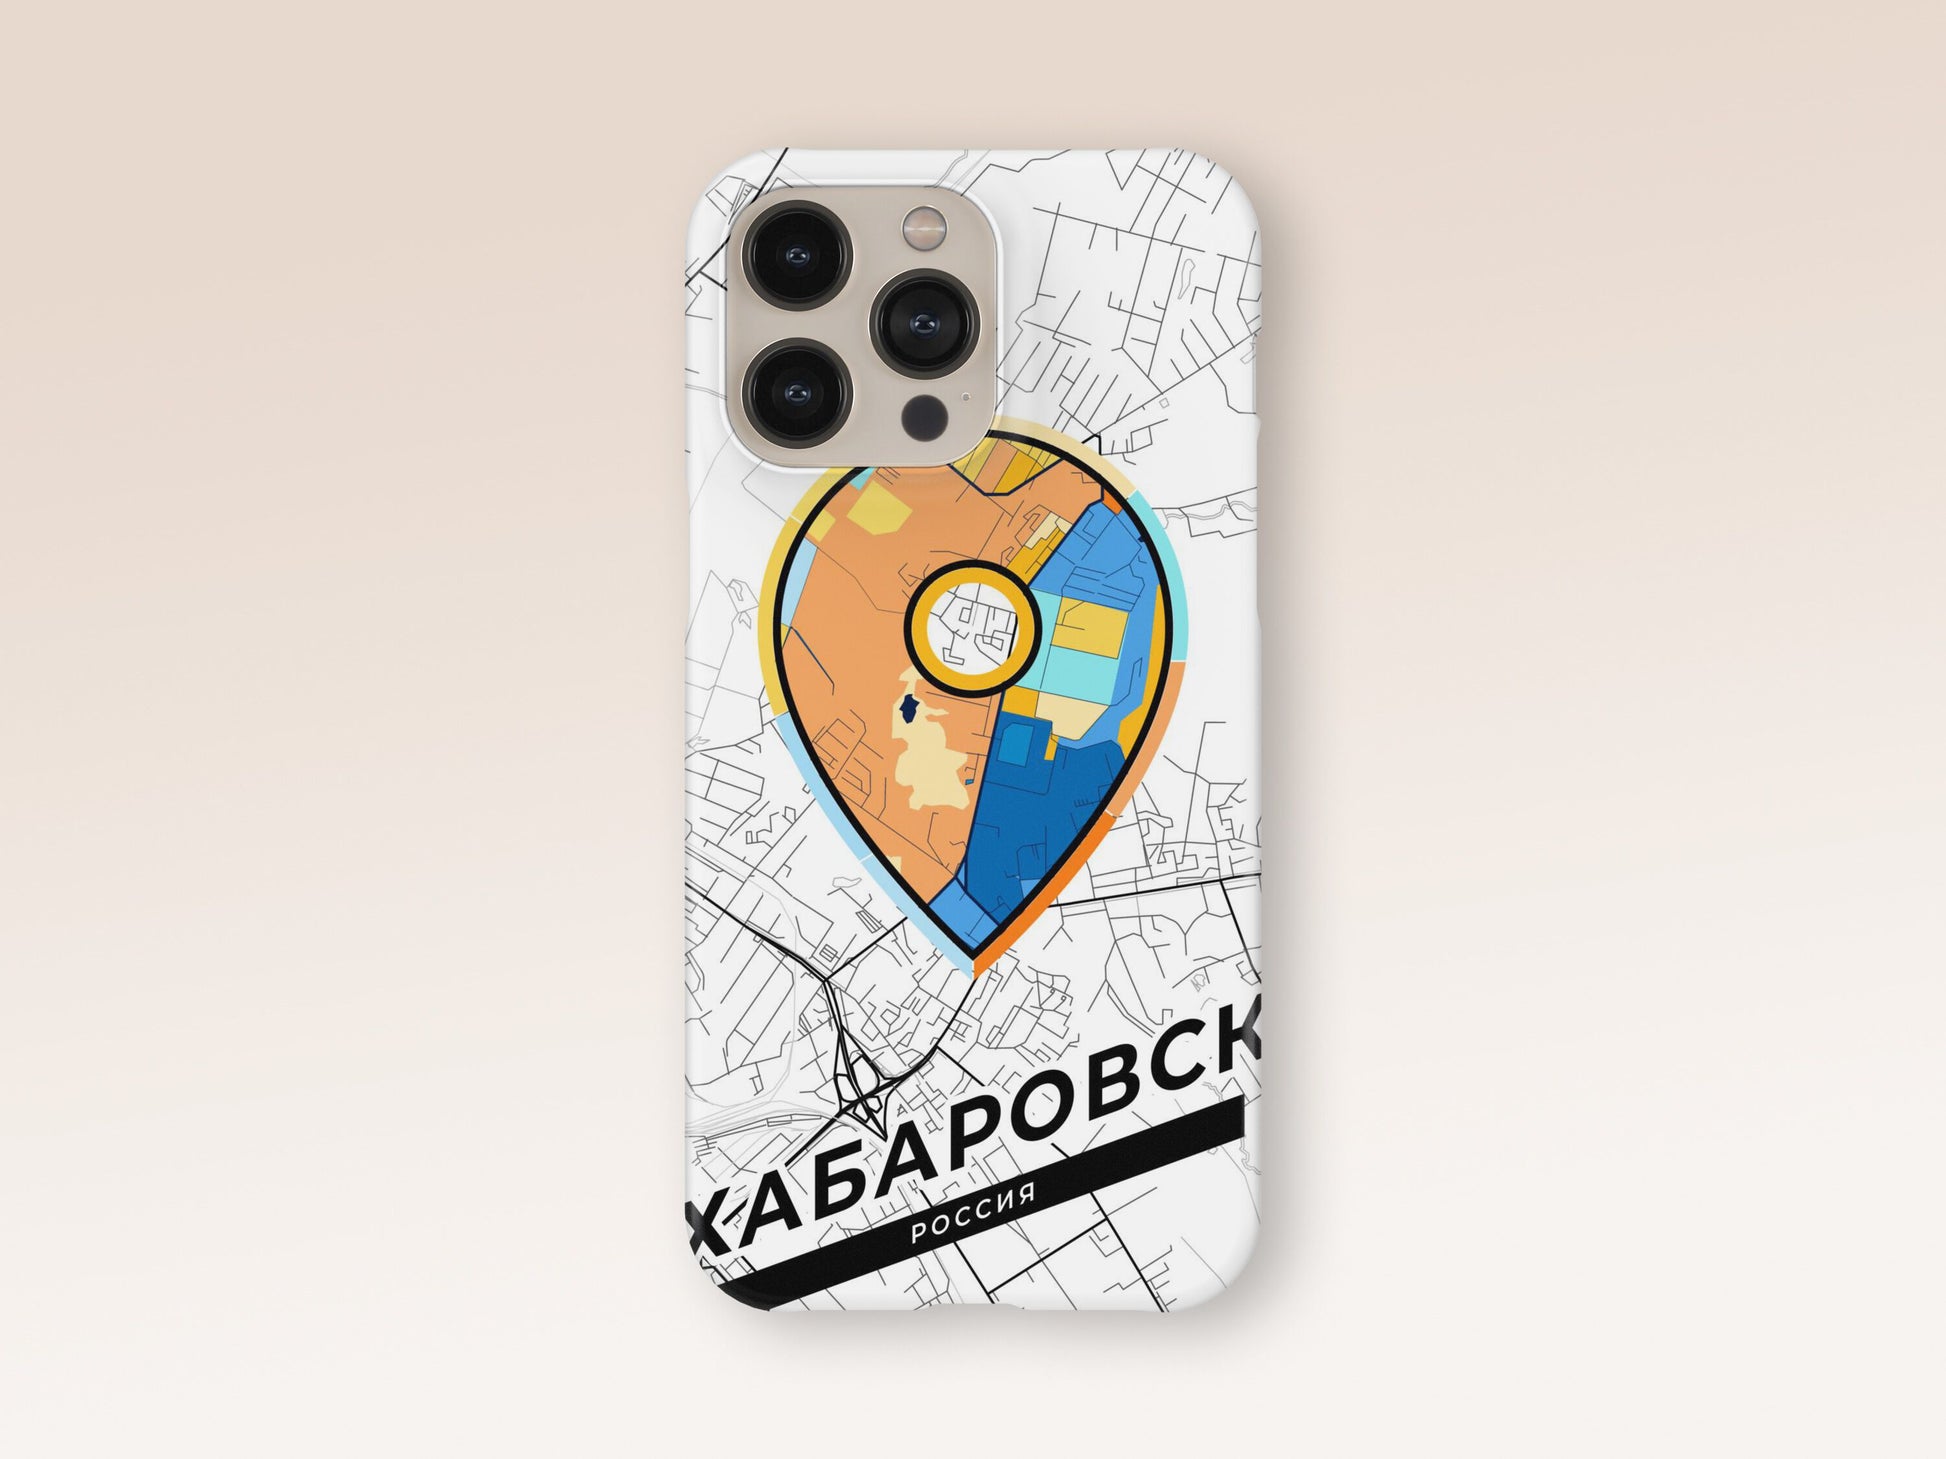 Khabarovsk Russia slim phone case with colorful icon. Birthday, wedding or housewarming gift. Couple match cases. 1